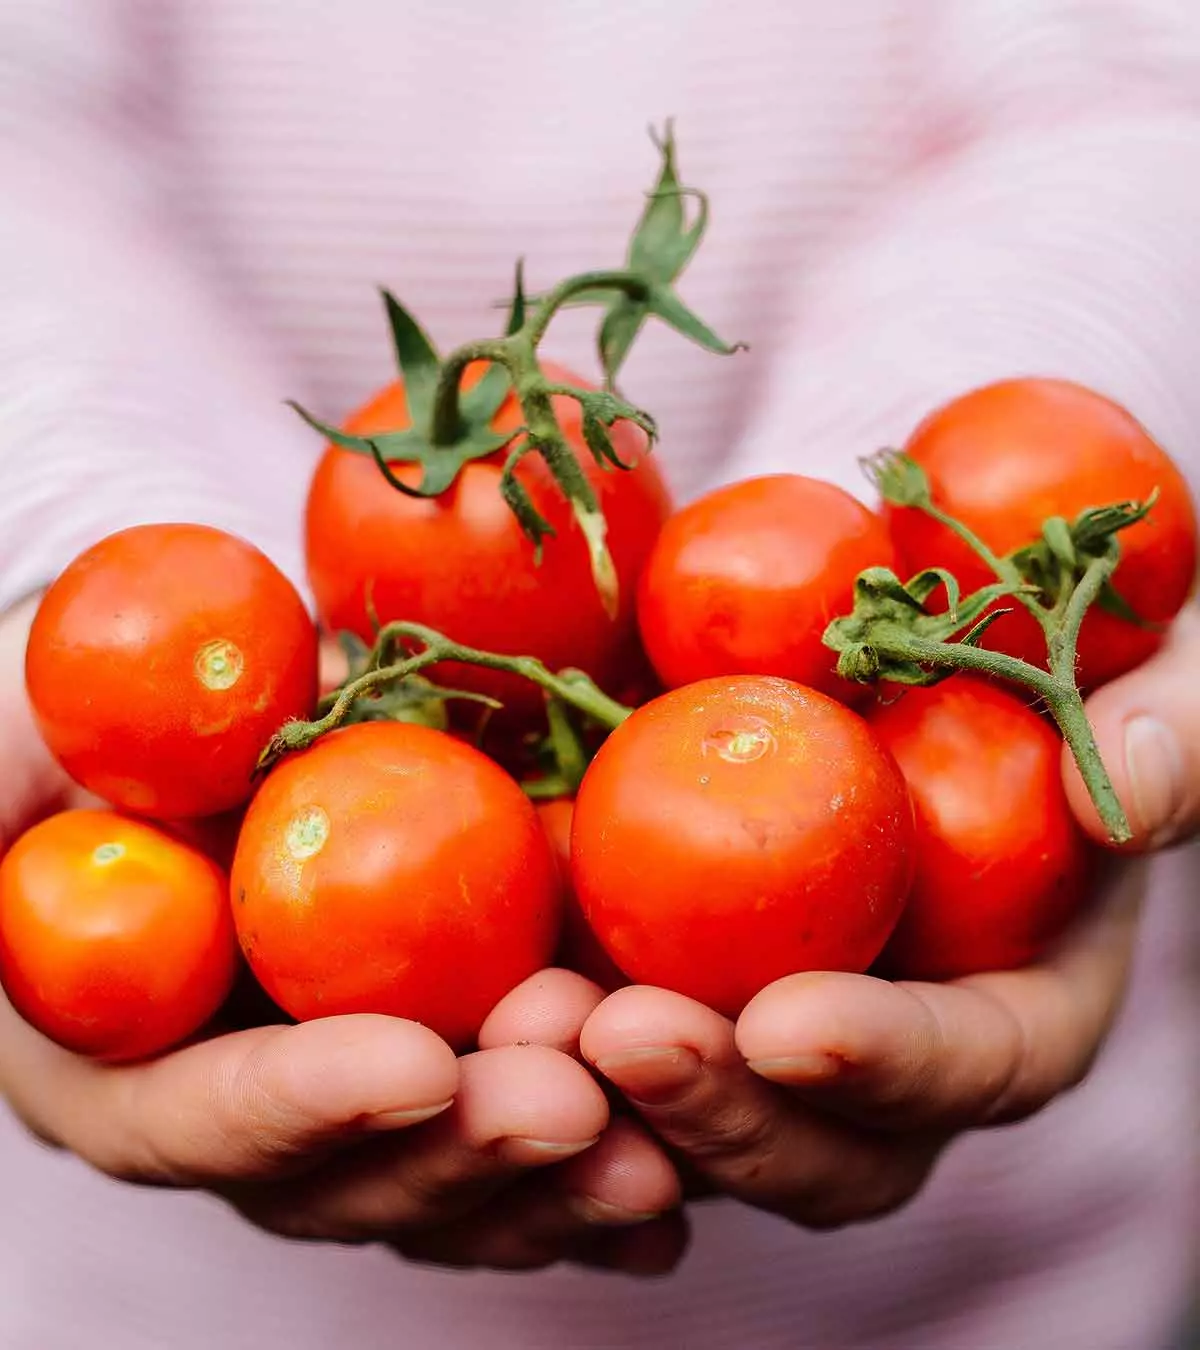 Tomatoes During Pregnancy: Possible Benefits And Risks